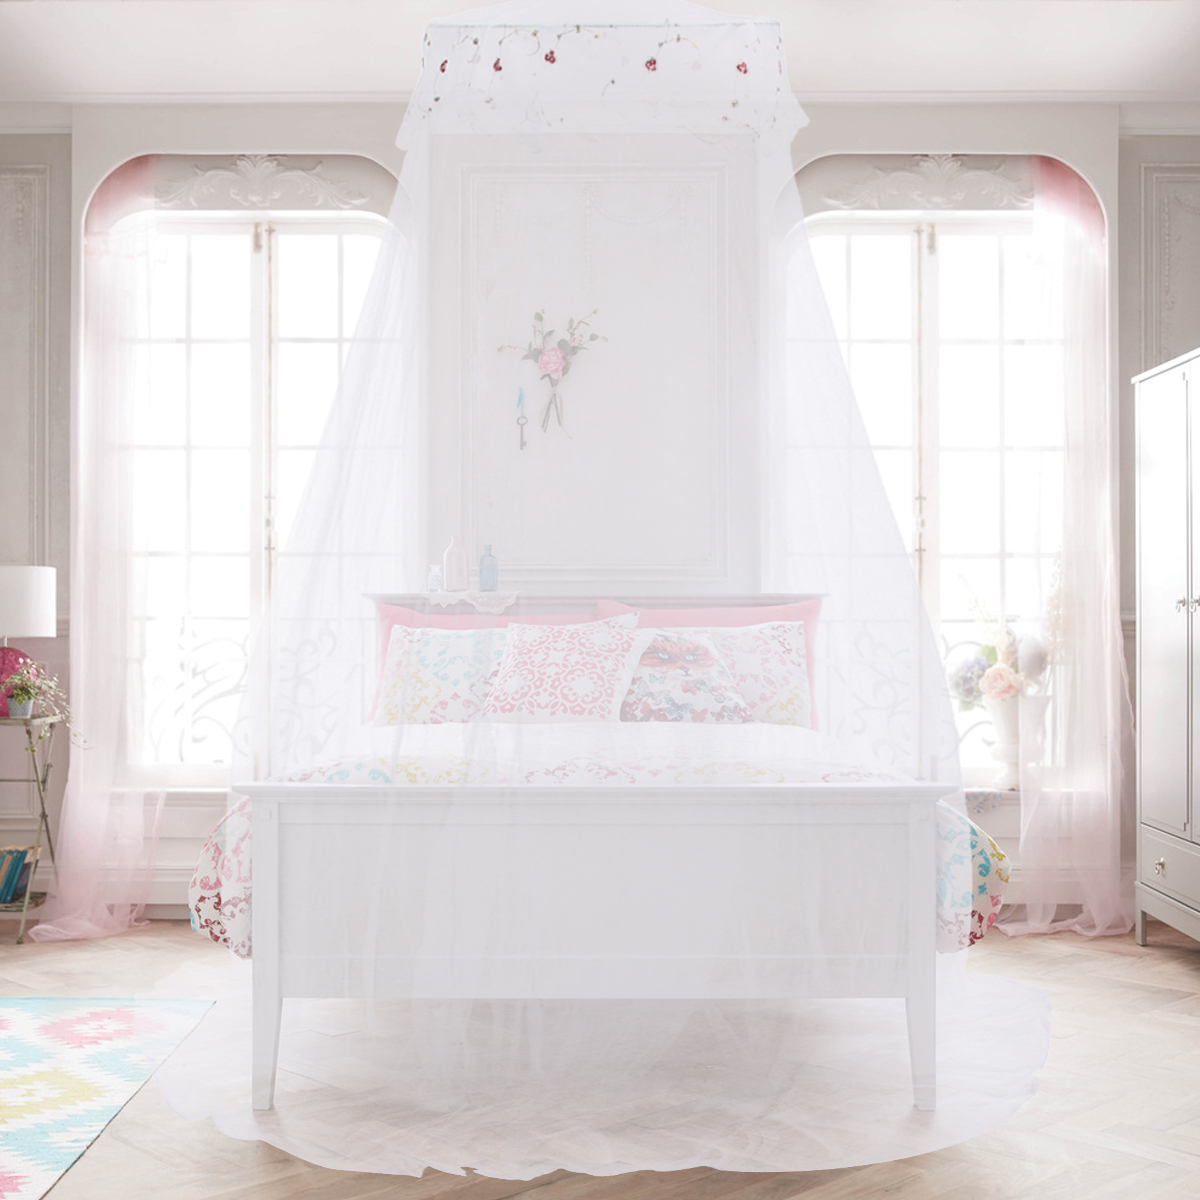 Elegant-Lace-Bed-Mosquito-Netting-Mesh-Canopy-Princess-Round-Dome-Bedding-Net-1305007-4